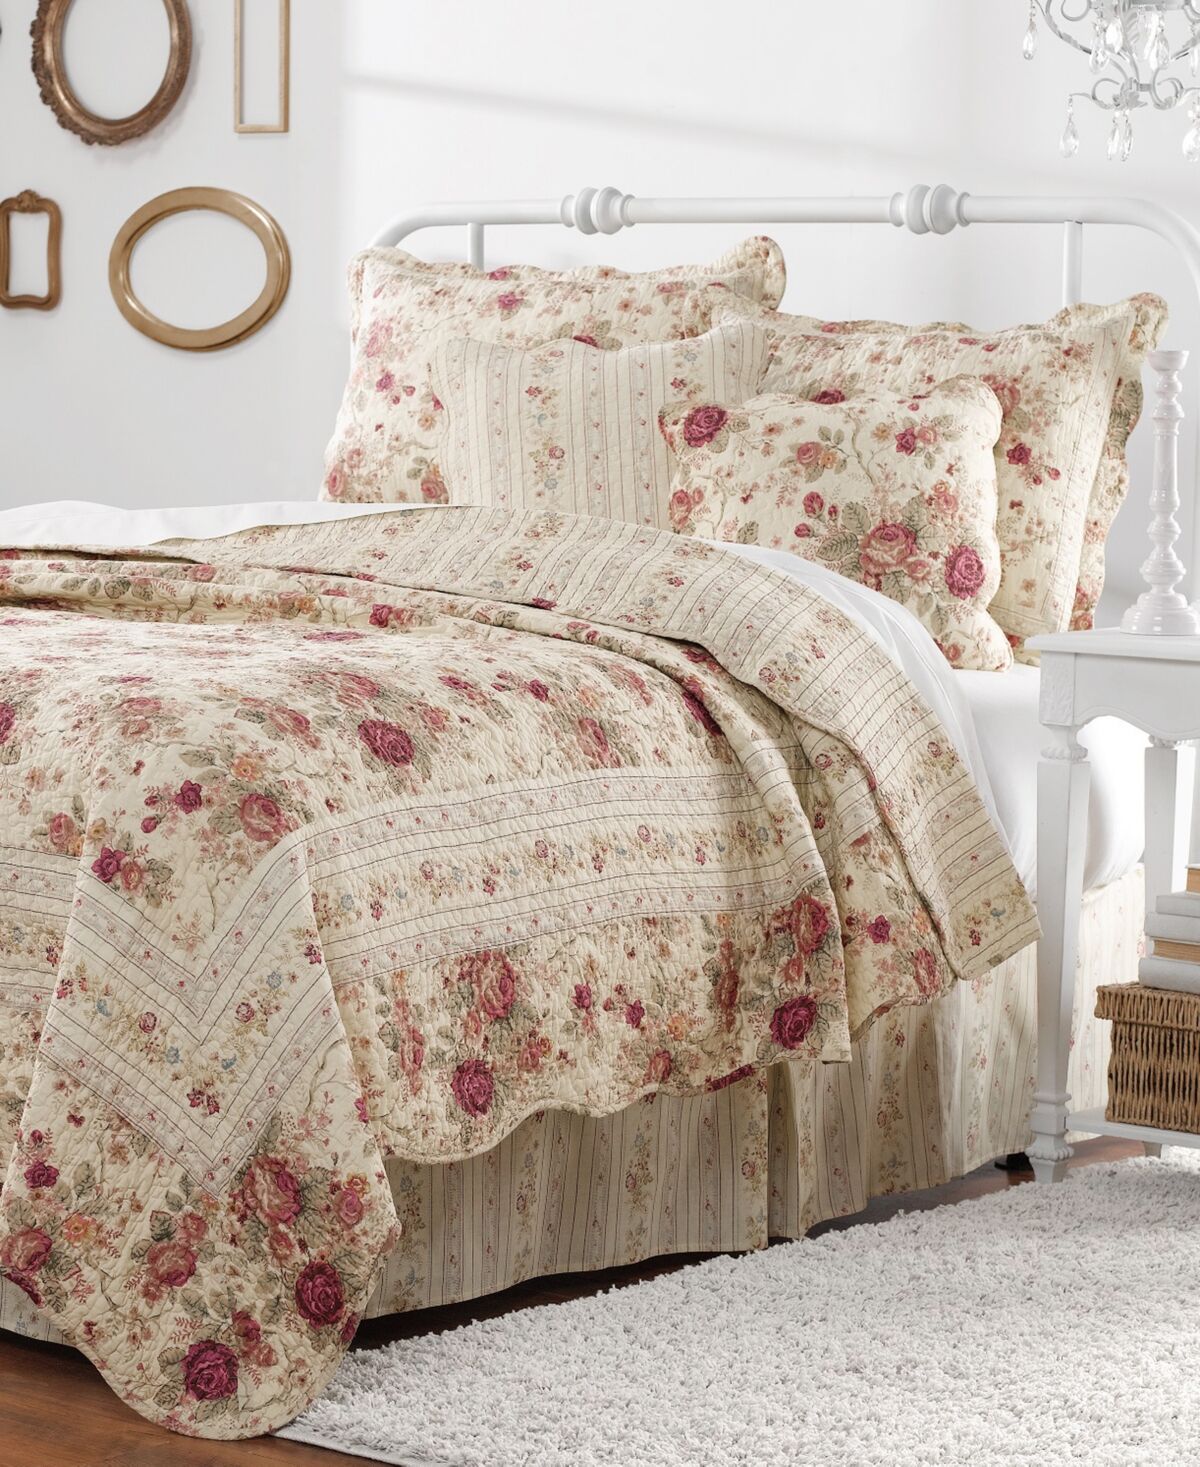 Greenland Home Fashions Antique-Like Rose 100% Cotton Reversible 5 Piece Quilt Set, King - Ecru